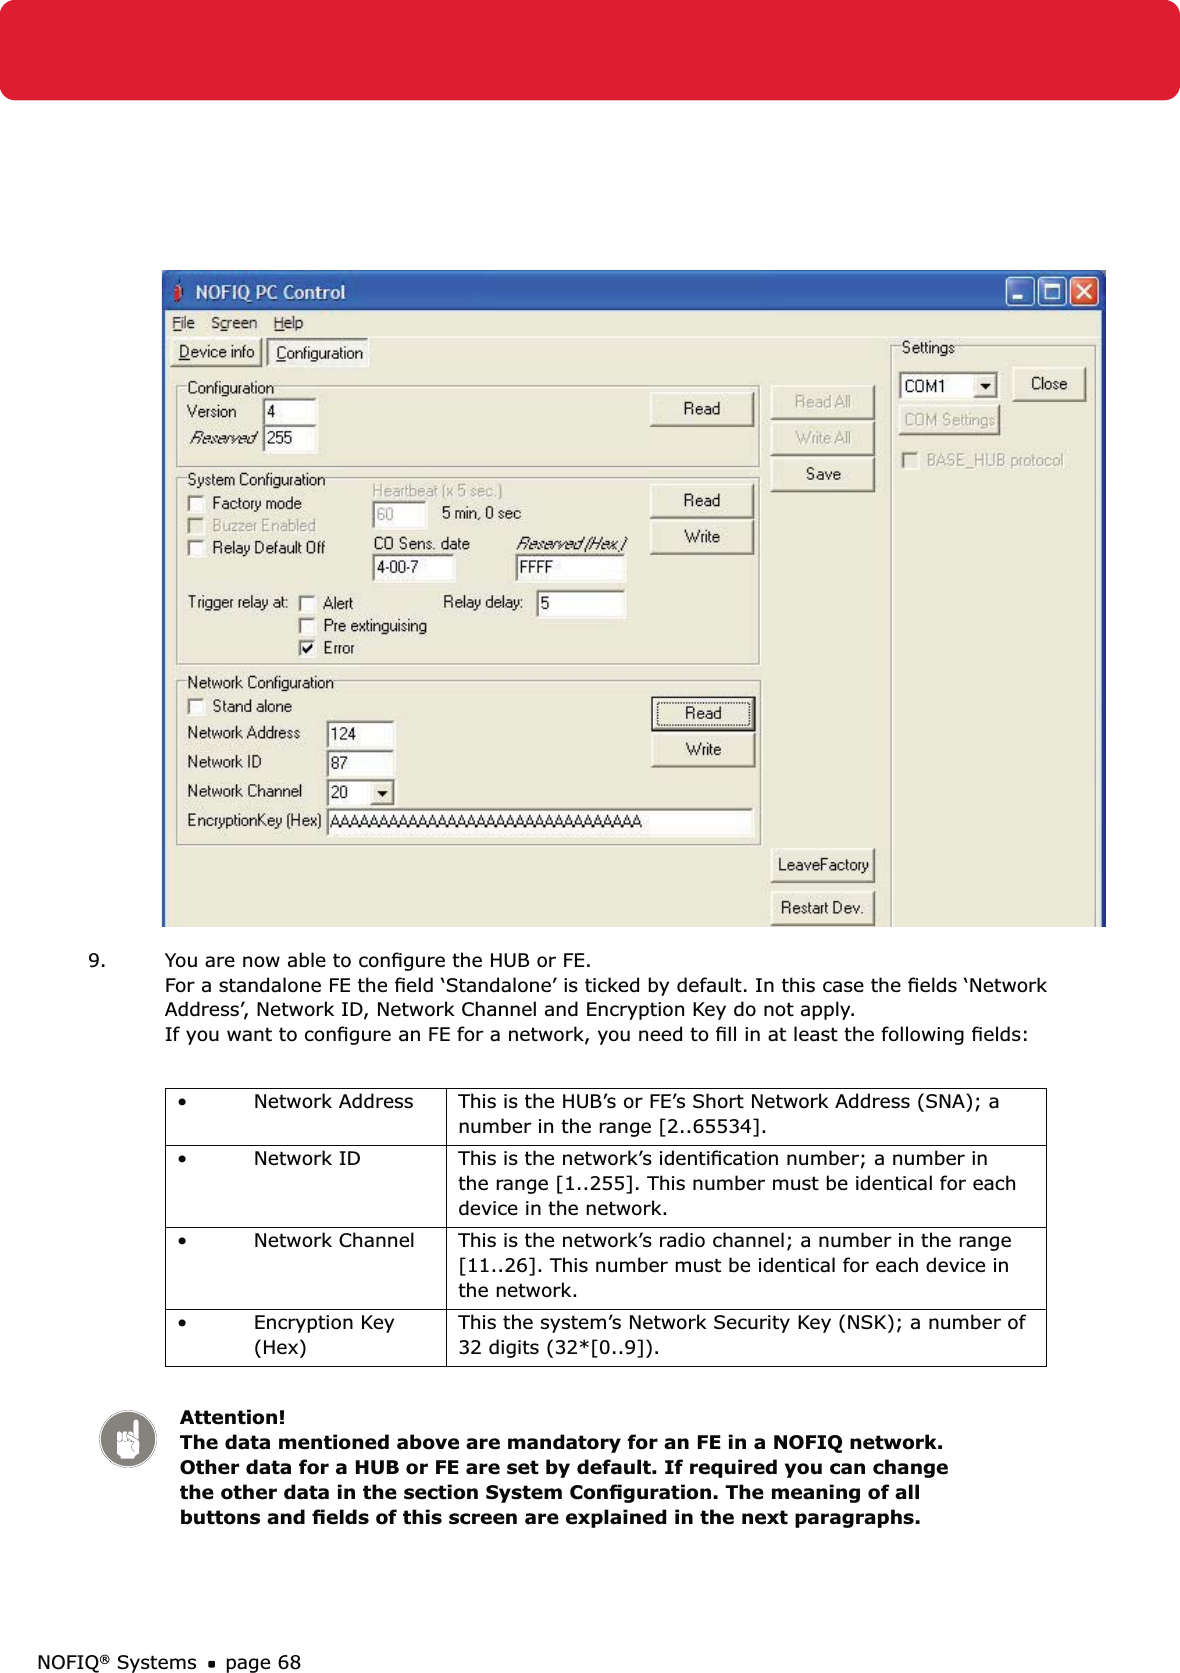 NOFIQ® Systems page 689.  You are now able to conﬁgure the HUB or FE.  For a standalone FE the ﬁeld ‘Standalone’ is ticked by default. In this case the ﬁelds ‘Network Address’, Network ID, Network Channel and Encryption Key do not apply.  If you want to conﬁgure an FE for a network, you need to ﬁll in at least the following ﬁelds:Network Address•  This is the HUB’s or FE’s Short Network Address (SNA); a number in the range [2..65534].Network ID•  This is the network’s identiﬁcation number; a number in the range [1..255]. This number must be identical for each device in the network. Network Channel•  This is the network’s radio channel; a number in the range [11..26]. This number must be identical for each device in the network.Encryption Key • (Hex)This the system’s Network Security Key (NSK); a number of  32 digits (32*[0..9]).  Attention! The data mentioned above are mandatory for an FE in a NOFIQ network. Other data for a HUB or FE are set by default. If required you can change the other data in the section System Conﬁguration. The meaning of all buttons and ﬁelds of this screen are explained in the next paragraphs.